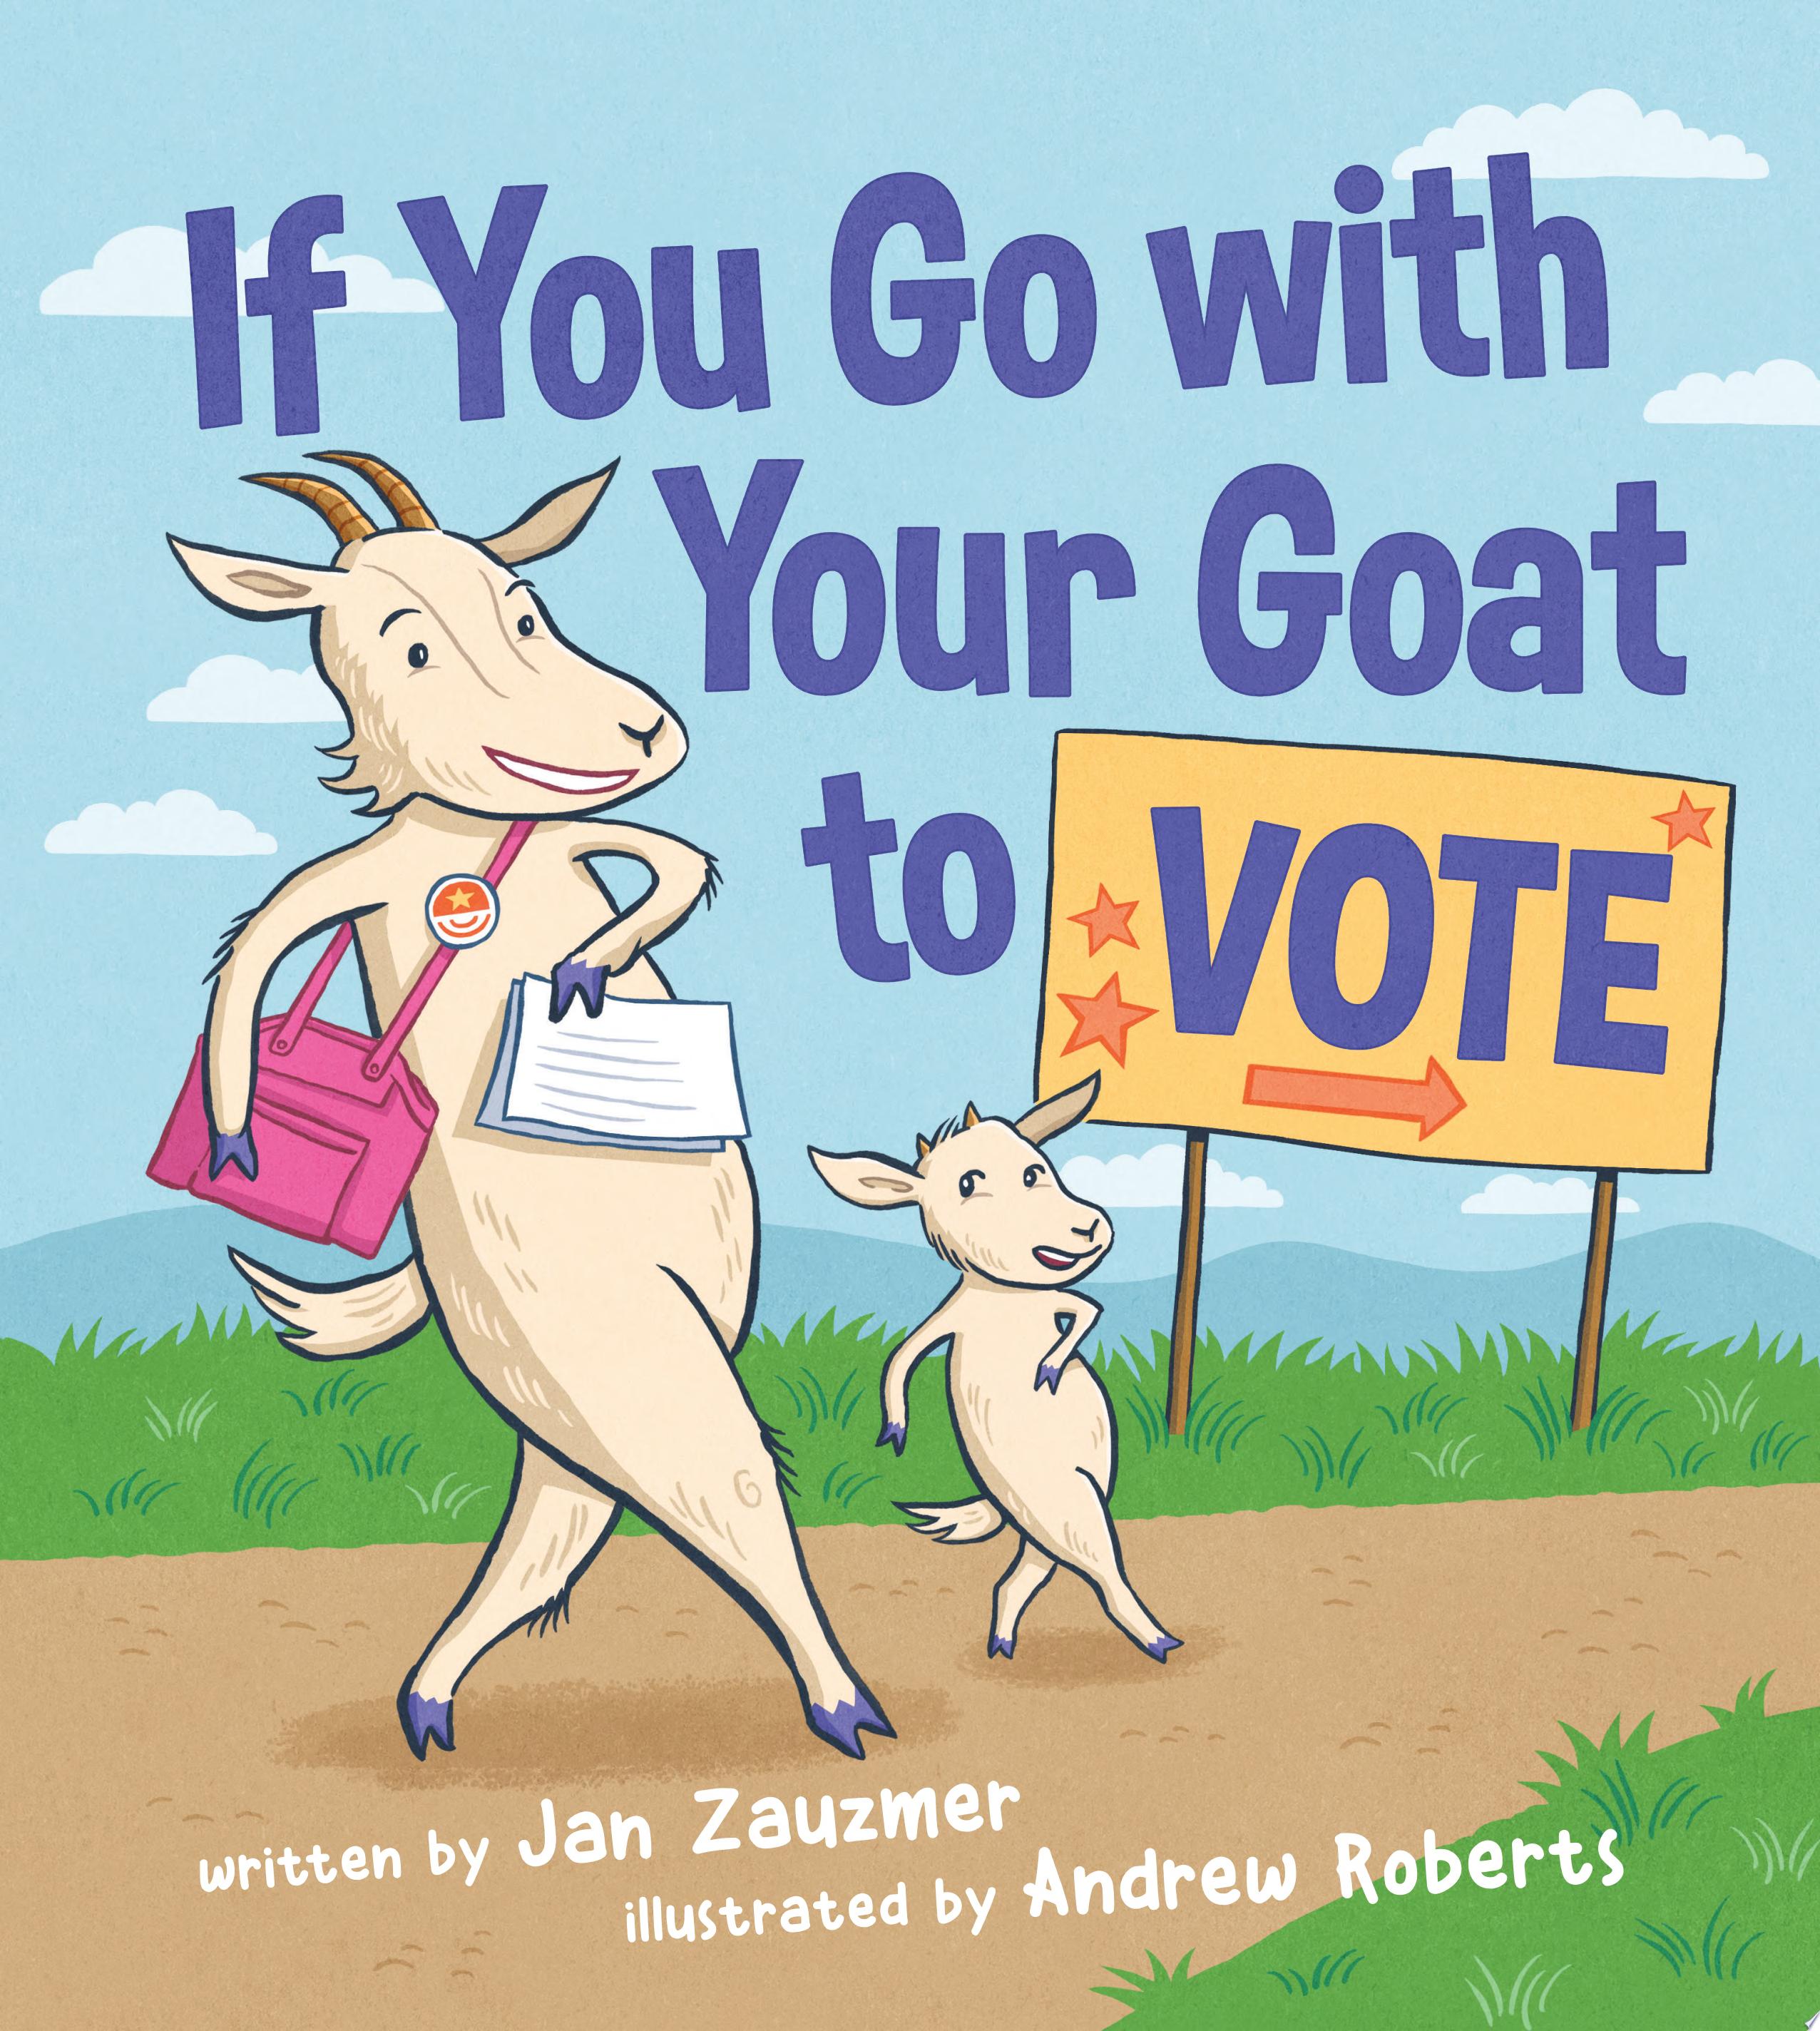 Image for "If You Go with Your Goat to Vote"